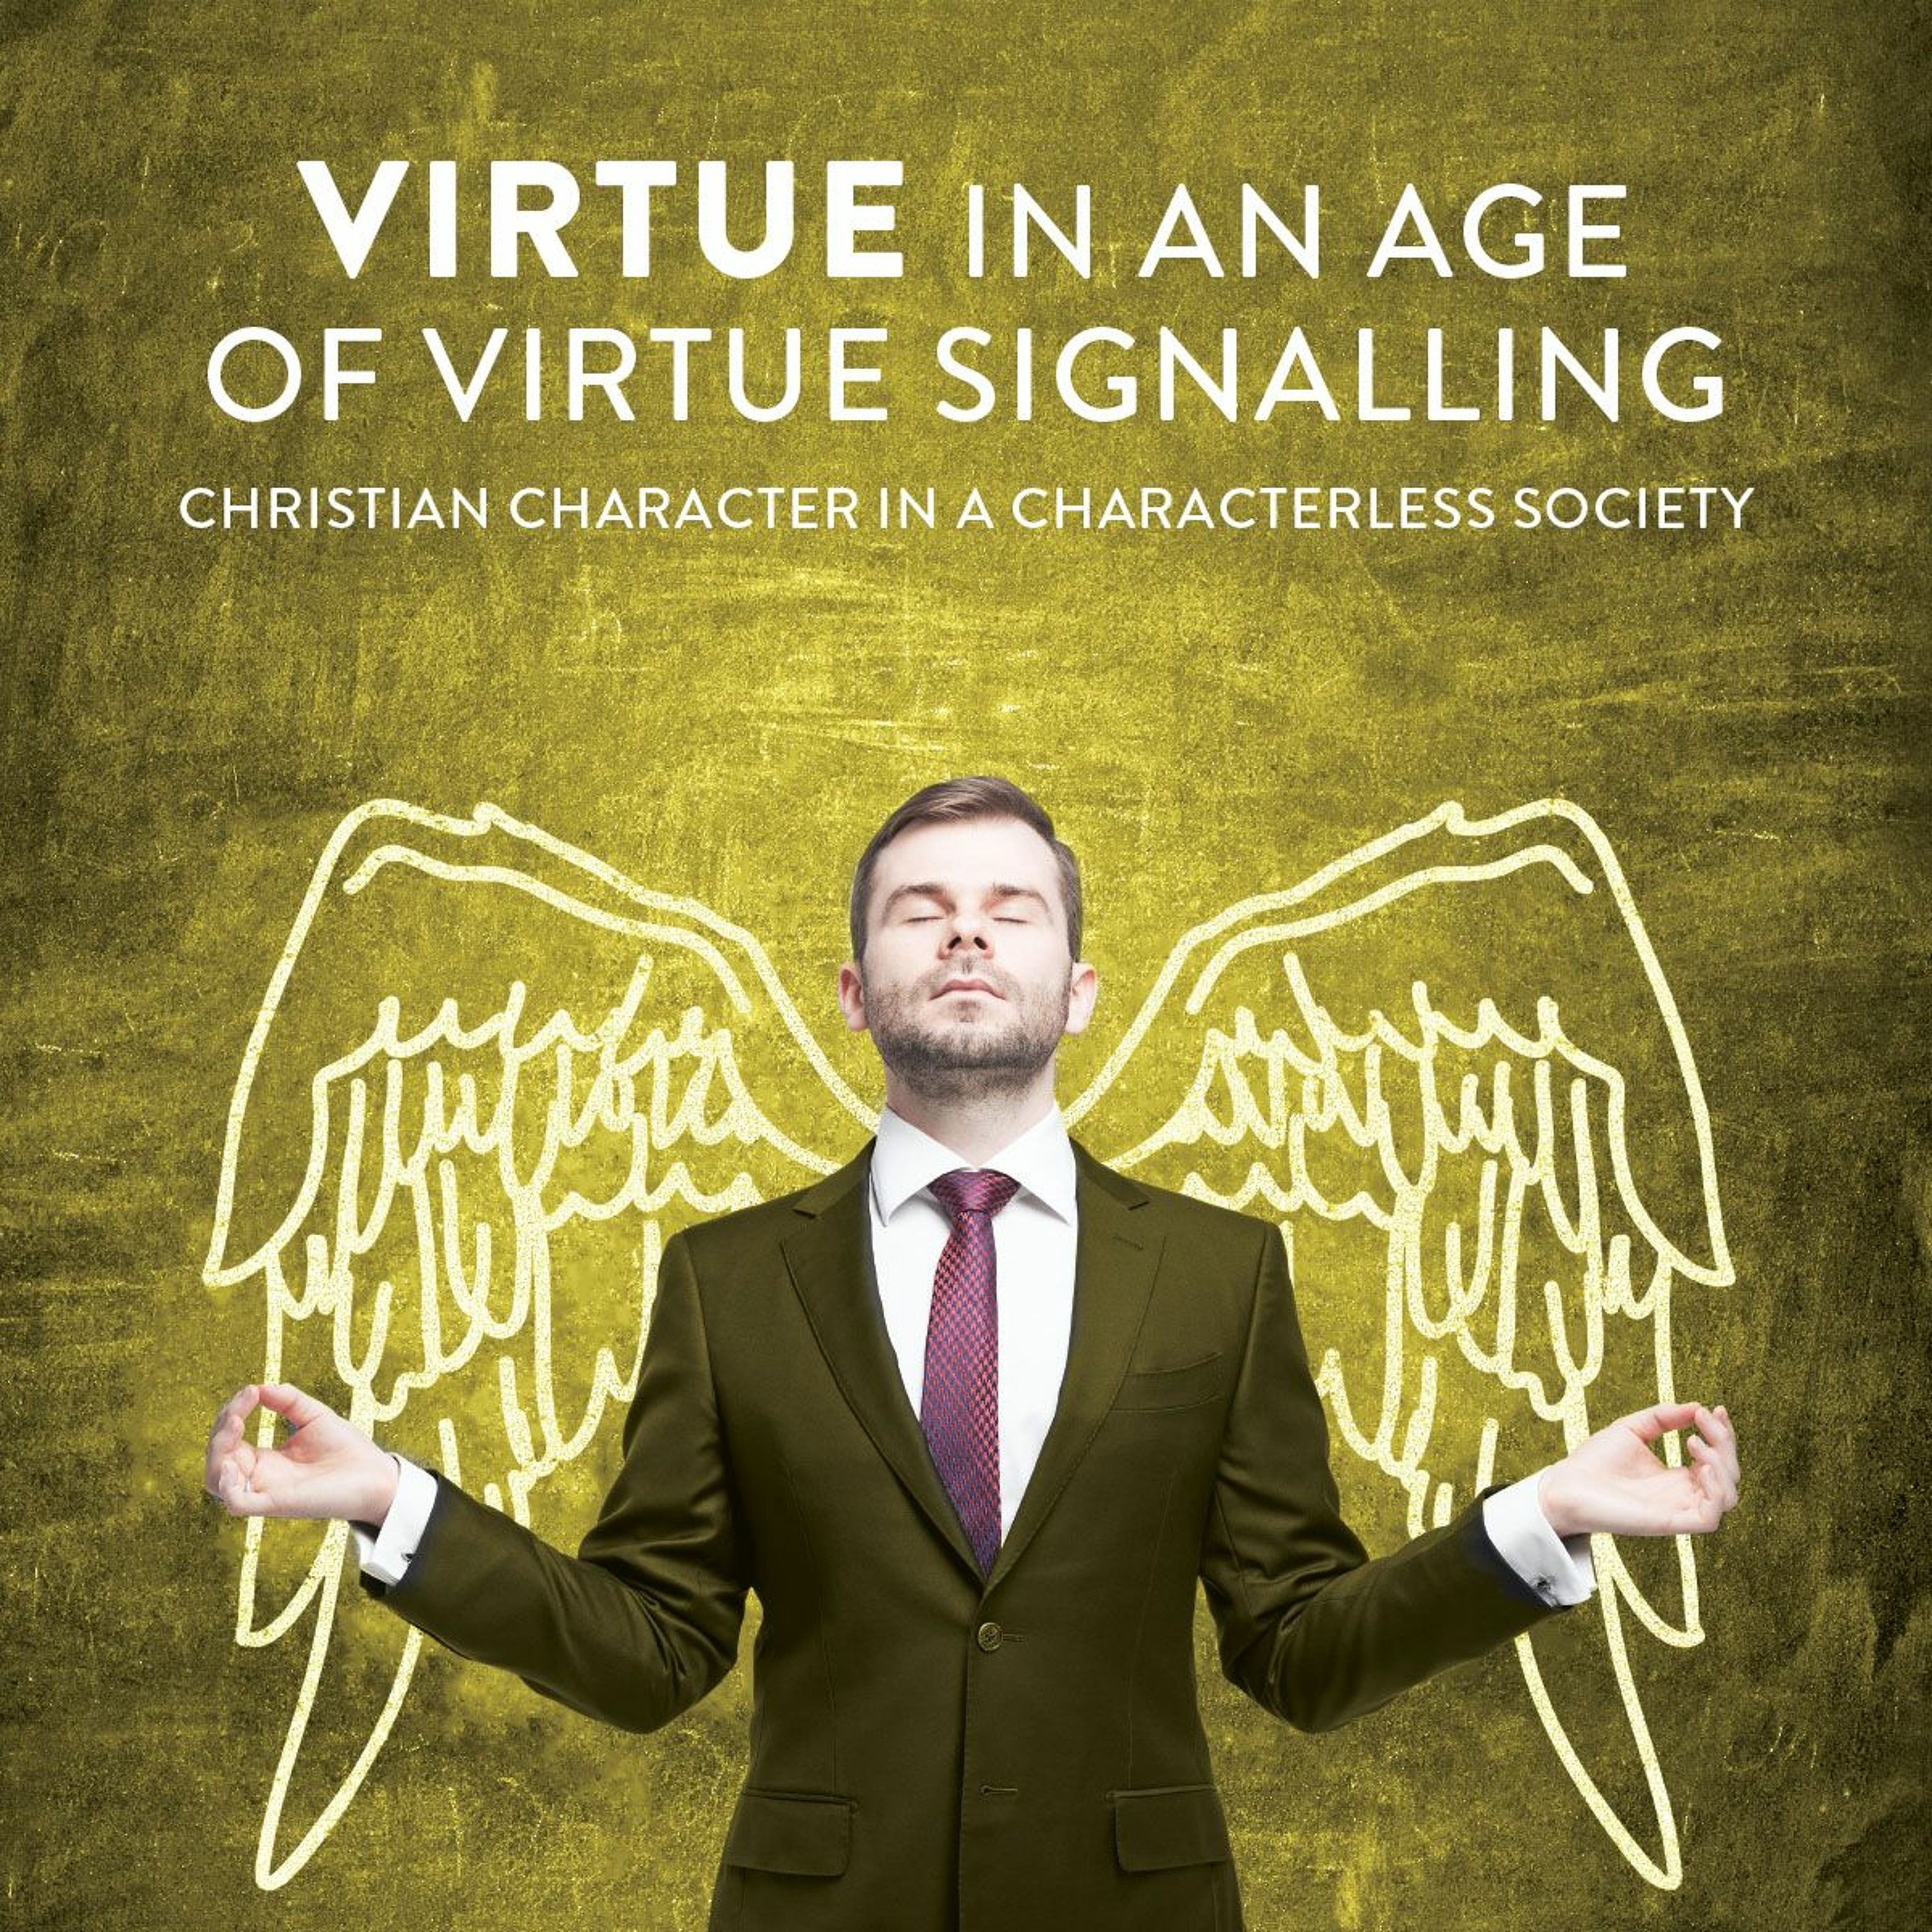 098: Virtue in an age of virtue signalling with David VanDrunen